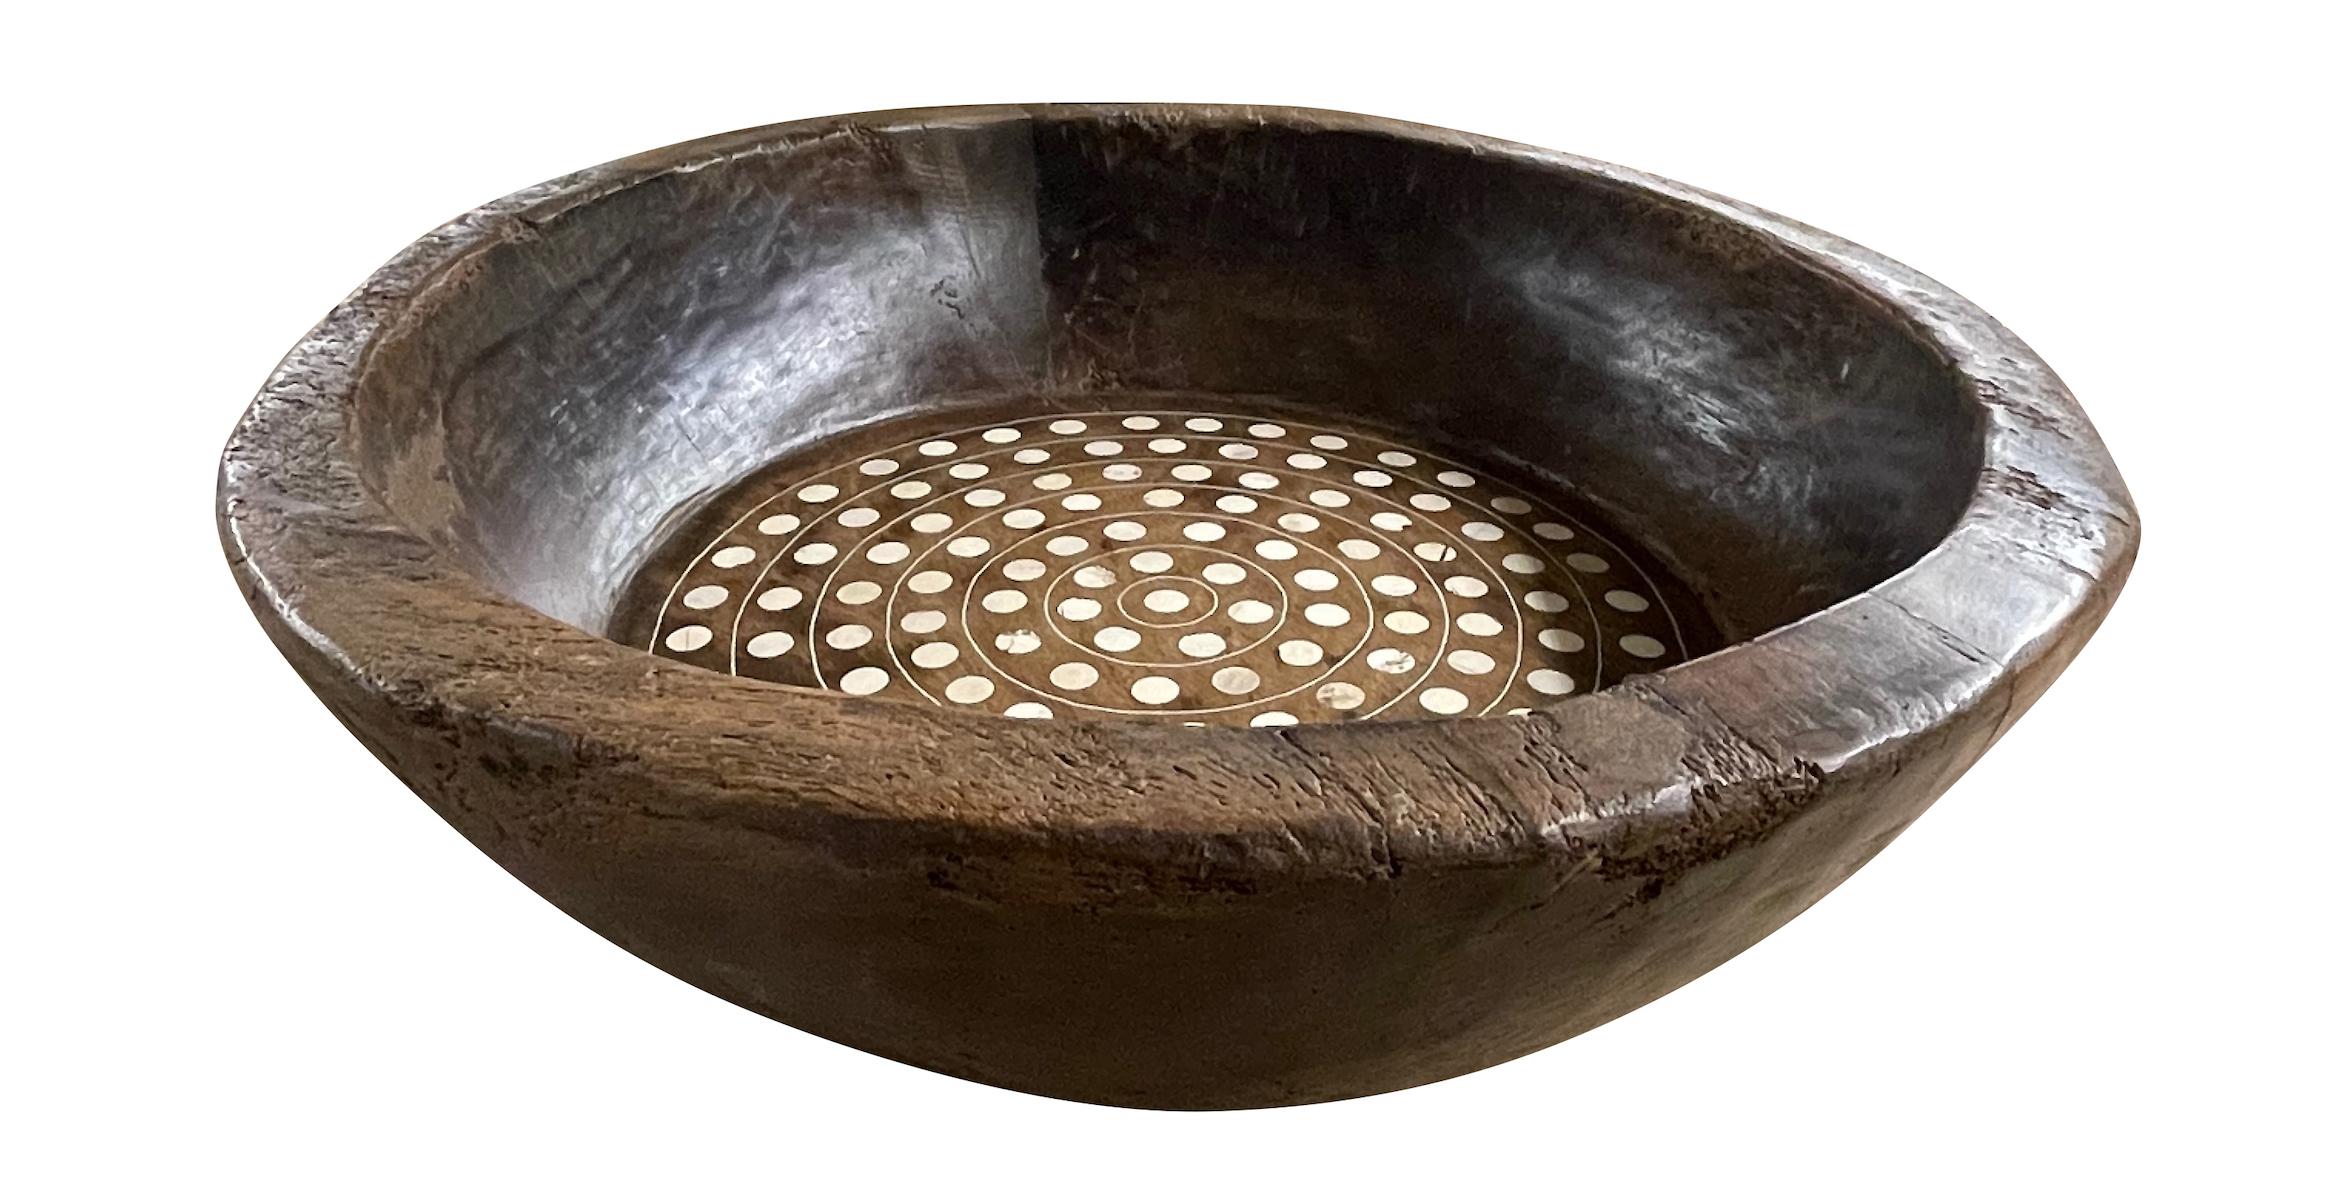 Contemporary Indian round wood bowl with round bone inlay.
